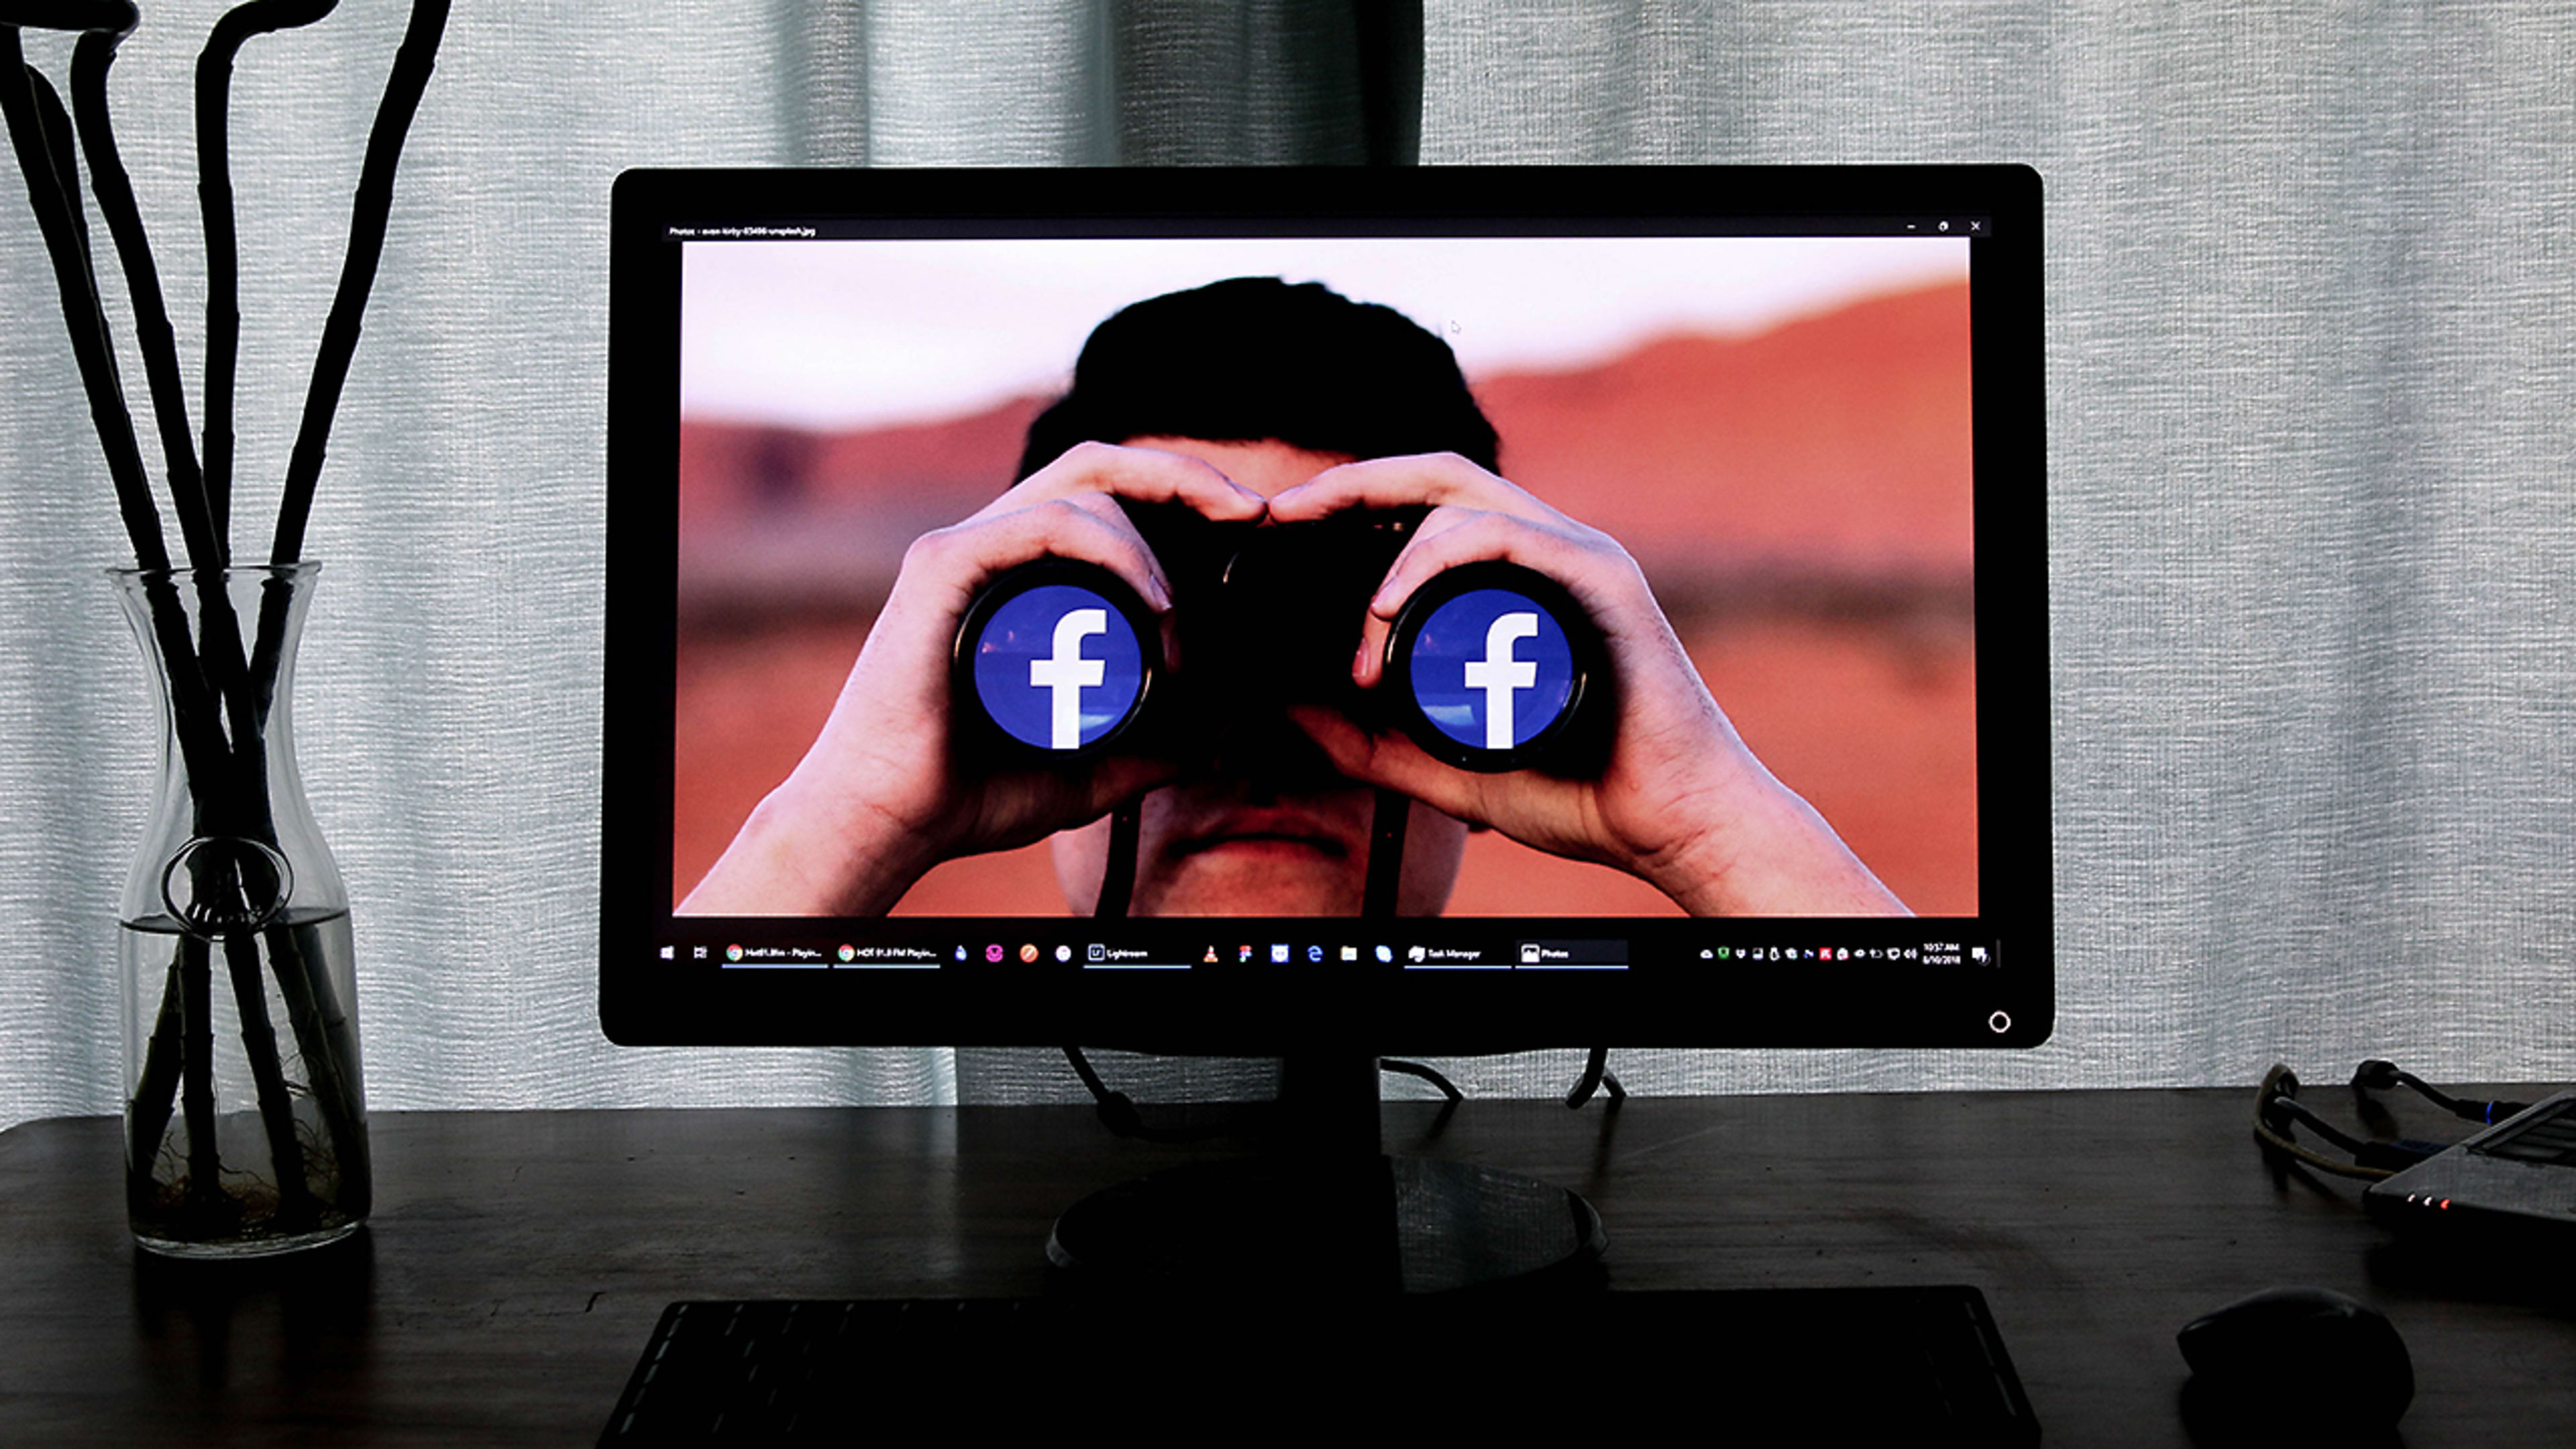 These 11 Facebook privacy tweaks put you back in control